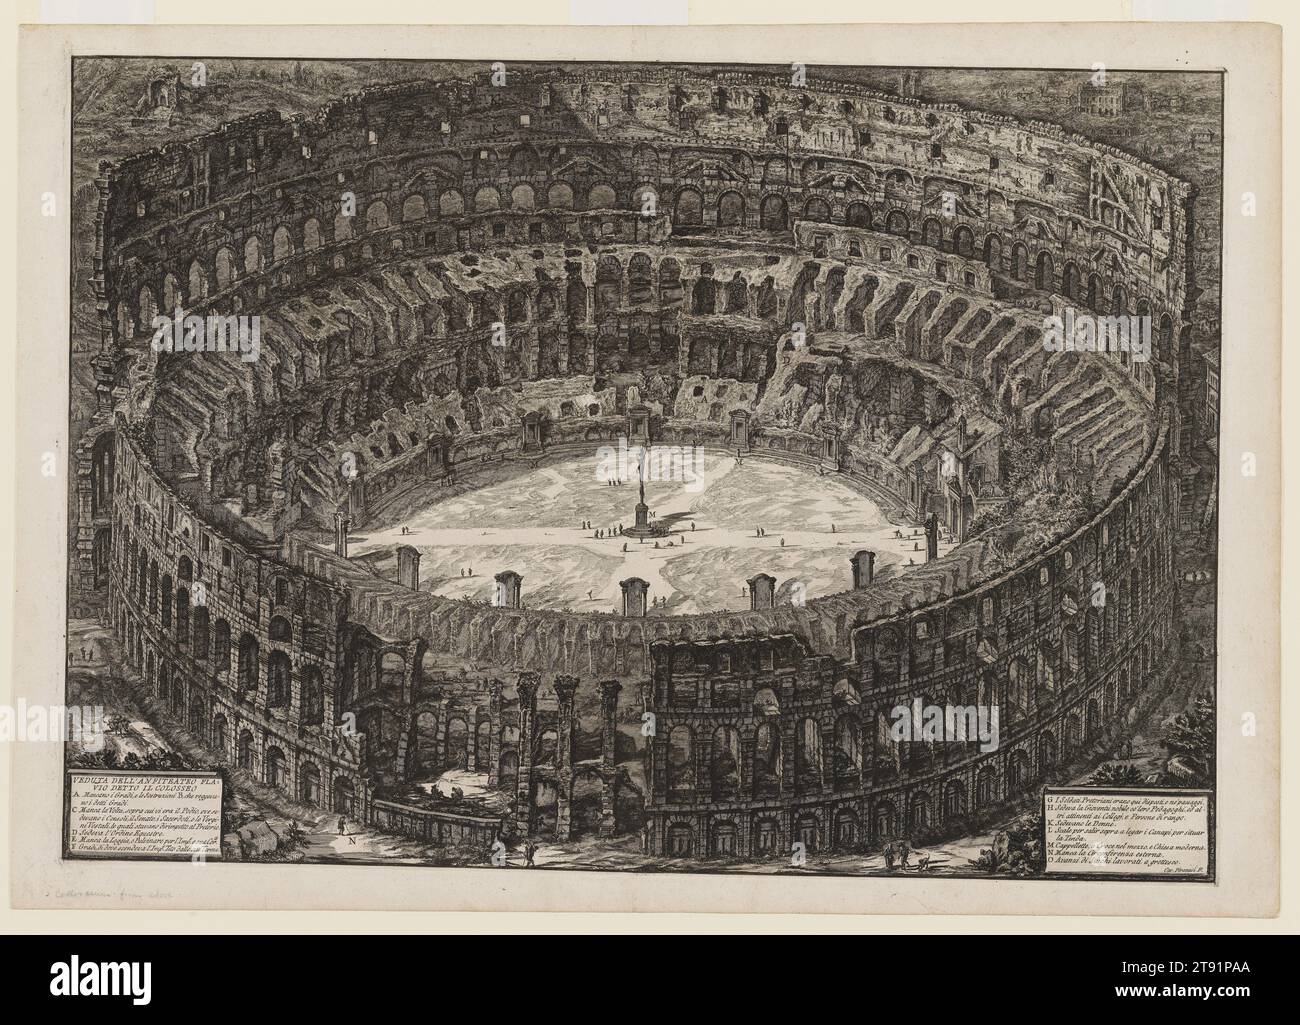 View of Flavian Amphitheater, called the Colosseum, 1776, Giovanni Battista Piranesi, Italian (Rome), Italian, 1720–1778, 19 3/8 x 27 5/8 in. (49.21 x 70.17 cm) (plate)21 3/8 x 30 3/8 in. (54.29 x 77.15 cm) (sheet), Etching and engraving, Italy, 18th century, Gladiator combats, wild-animal hunts, executions—all manner of spectacle took place inside the Colosseum, which could hold up to 80,000 people. It was even filled with water to hold mock naval battles. After Rome’s decline, the Colosseum was seen as a ready source of building materials, and people plundered its great façade and interior Stock Photo